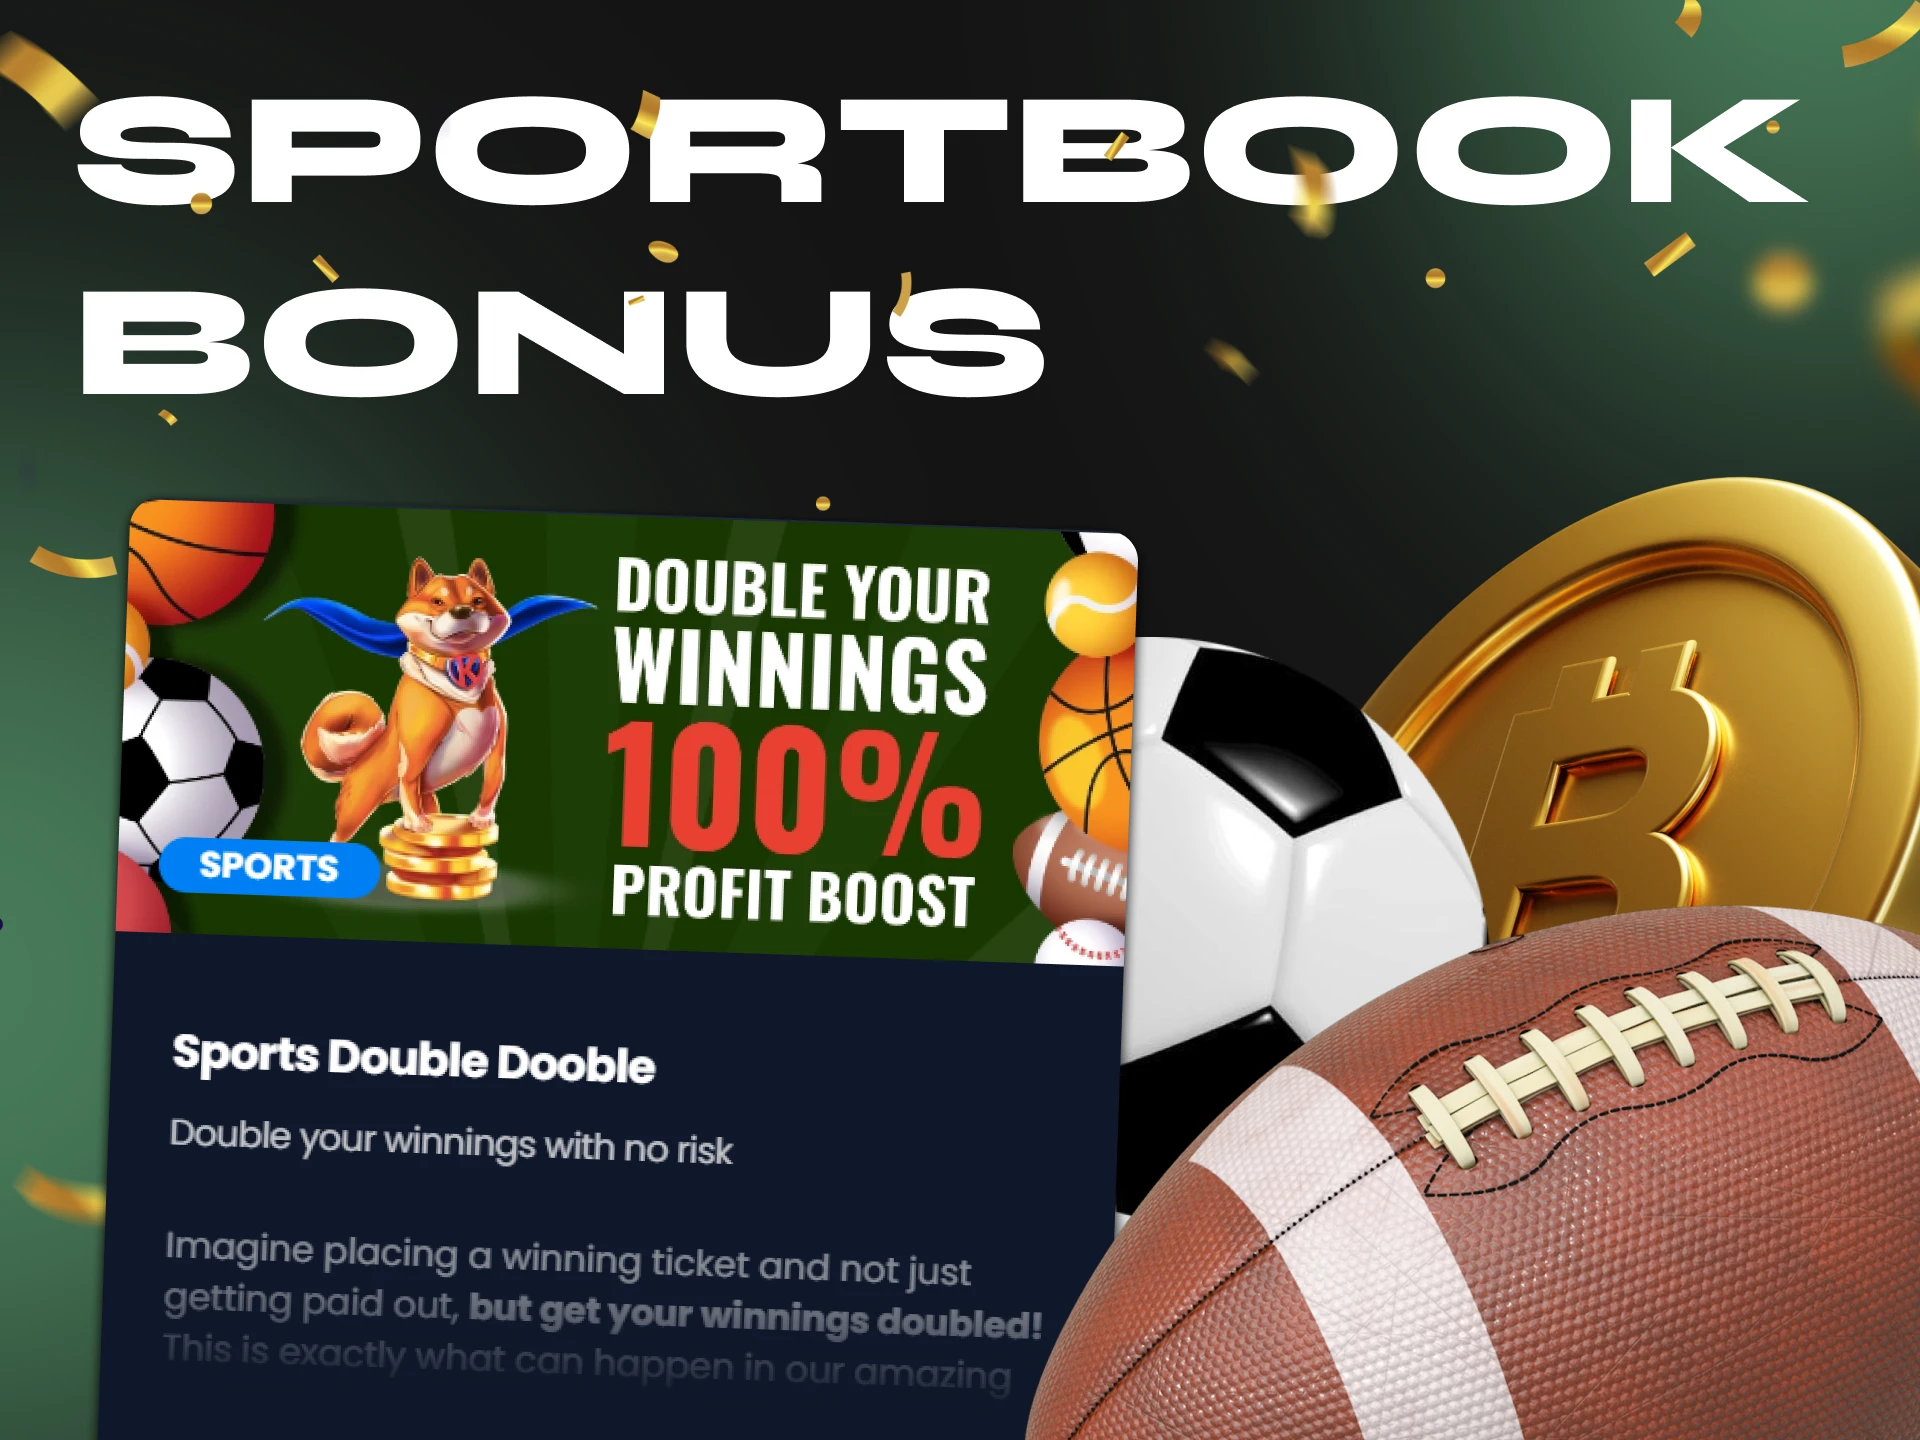 If you are a sports fan, get a sportsbook bonus and start betting at a crypto casino.